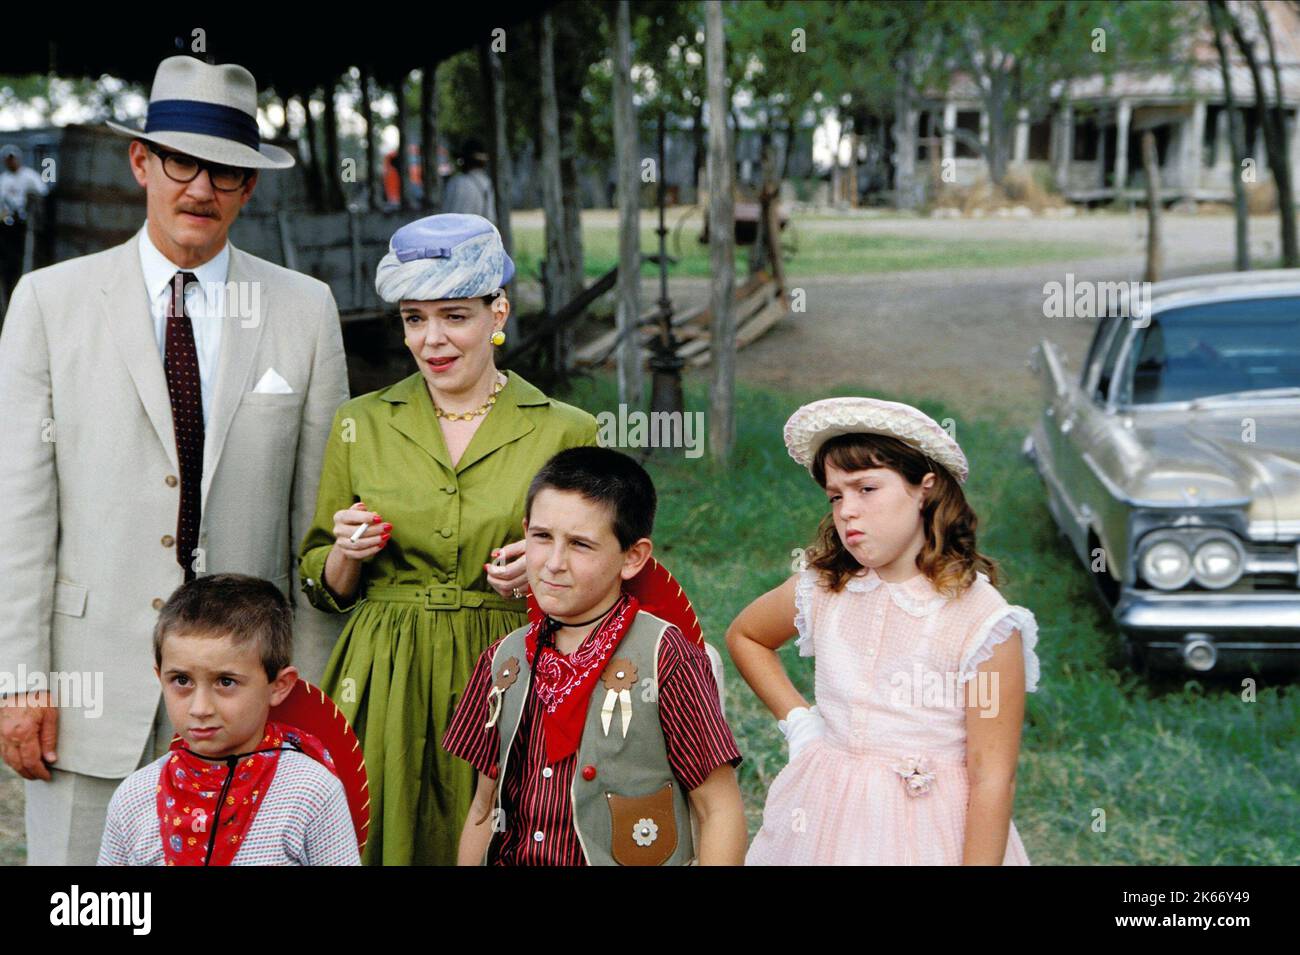 MARC MUSSO, MITCHEL MUSSO, JENNIFER STONE, MICHAEL O'NEILL, DEIRDRE O'CONNELL, SECONDHAND LIONS, 2003 Stock Photo